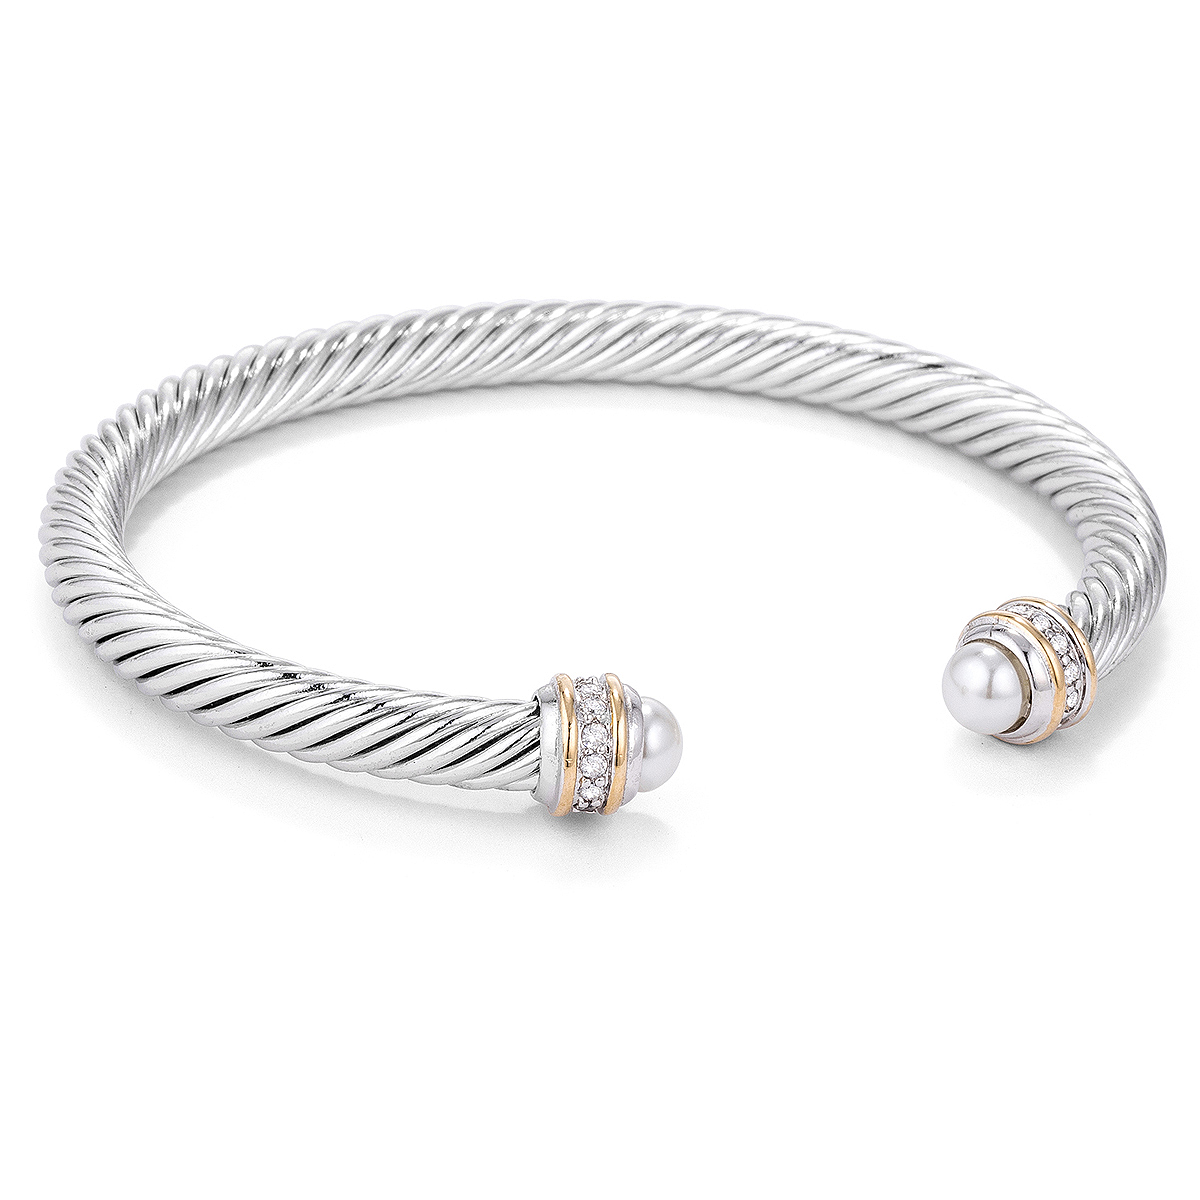 Silver Cable Bangle with Faux Pearl Crystal